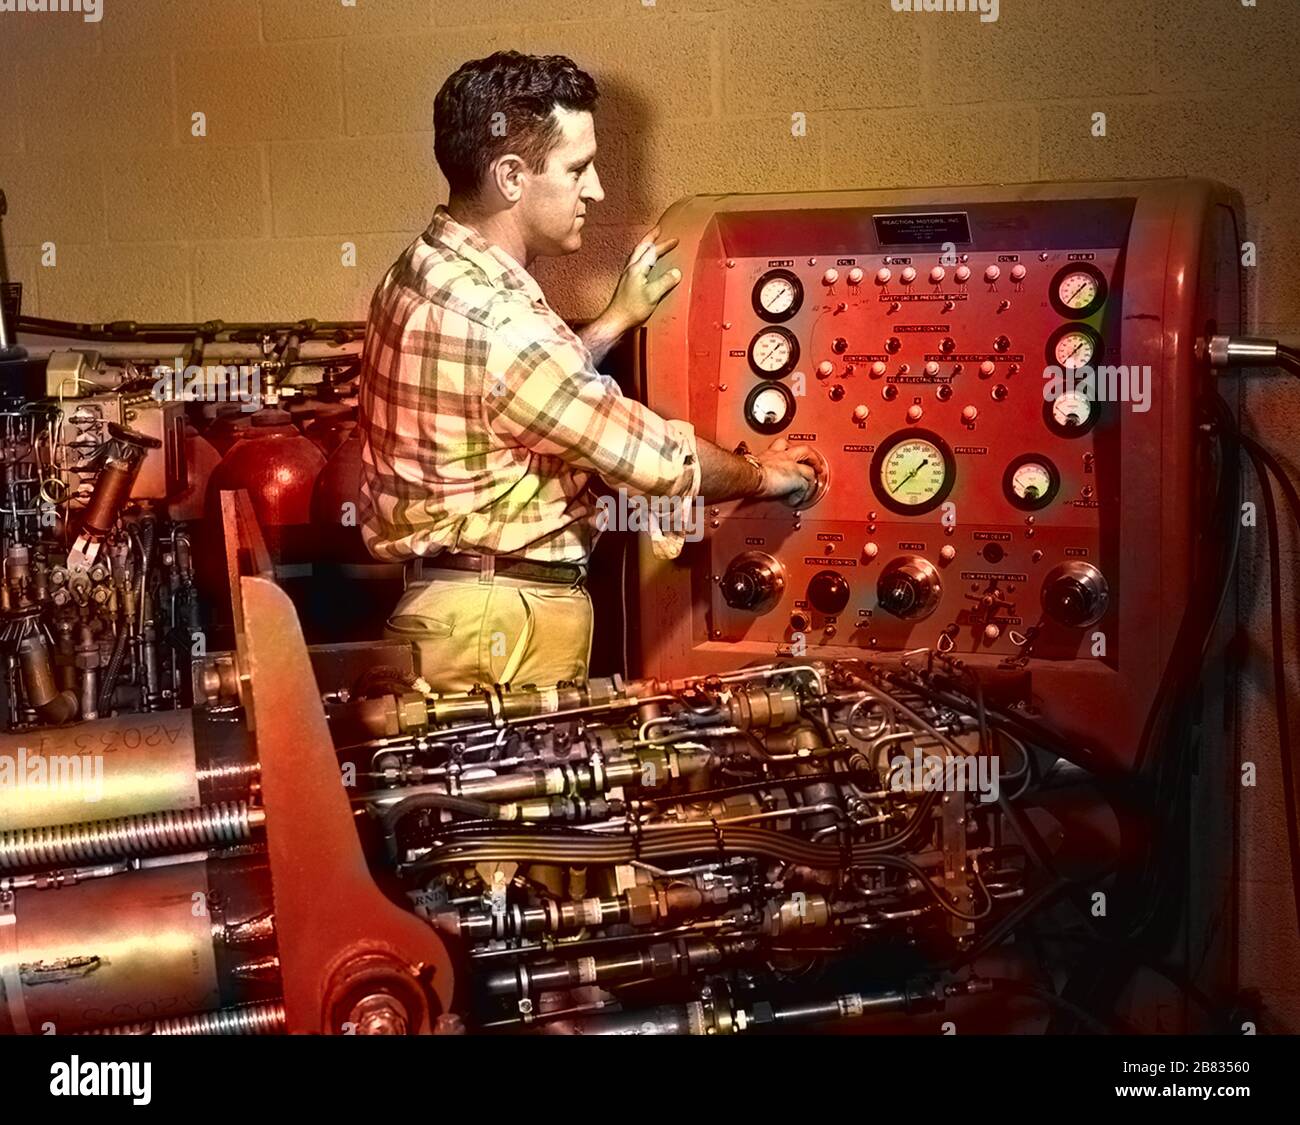 NASA engineer Jack Russell preparing to do pressurization tests on the XLR-11 rocket engine at NACA High-Speed Flight Station Rocket Shop, Armstrong Flight Research Center, Edwards Air Force Base, California, 1956. Image courtesy National Aeronautics and Space Administration (NASA). Note: Image has been digitally colorized using a modern process. Colors may not be period-accurate. () Stock Photo